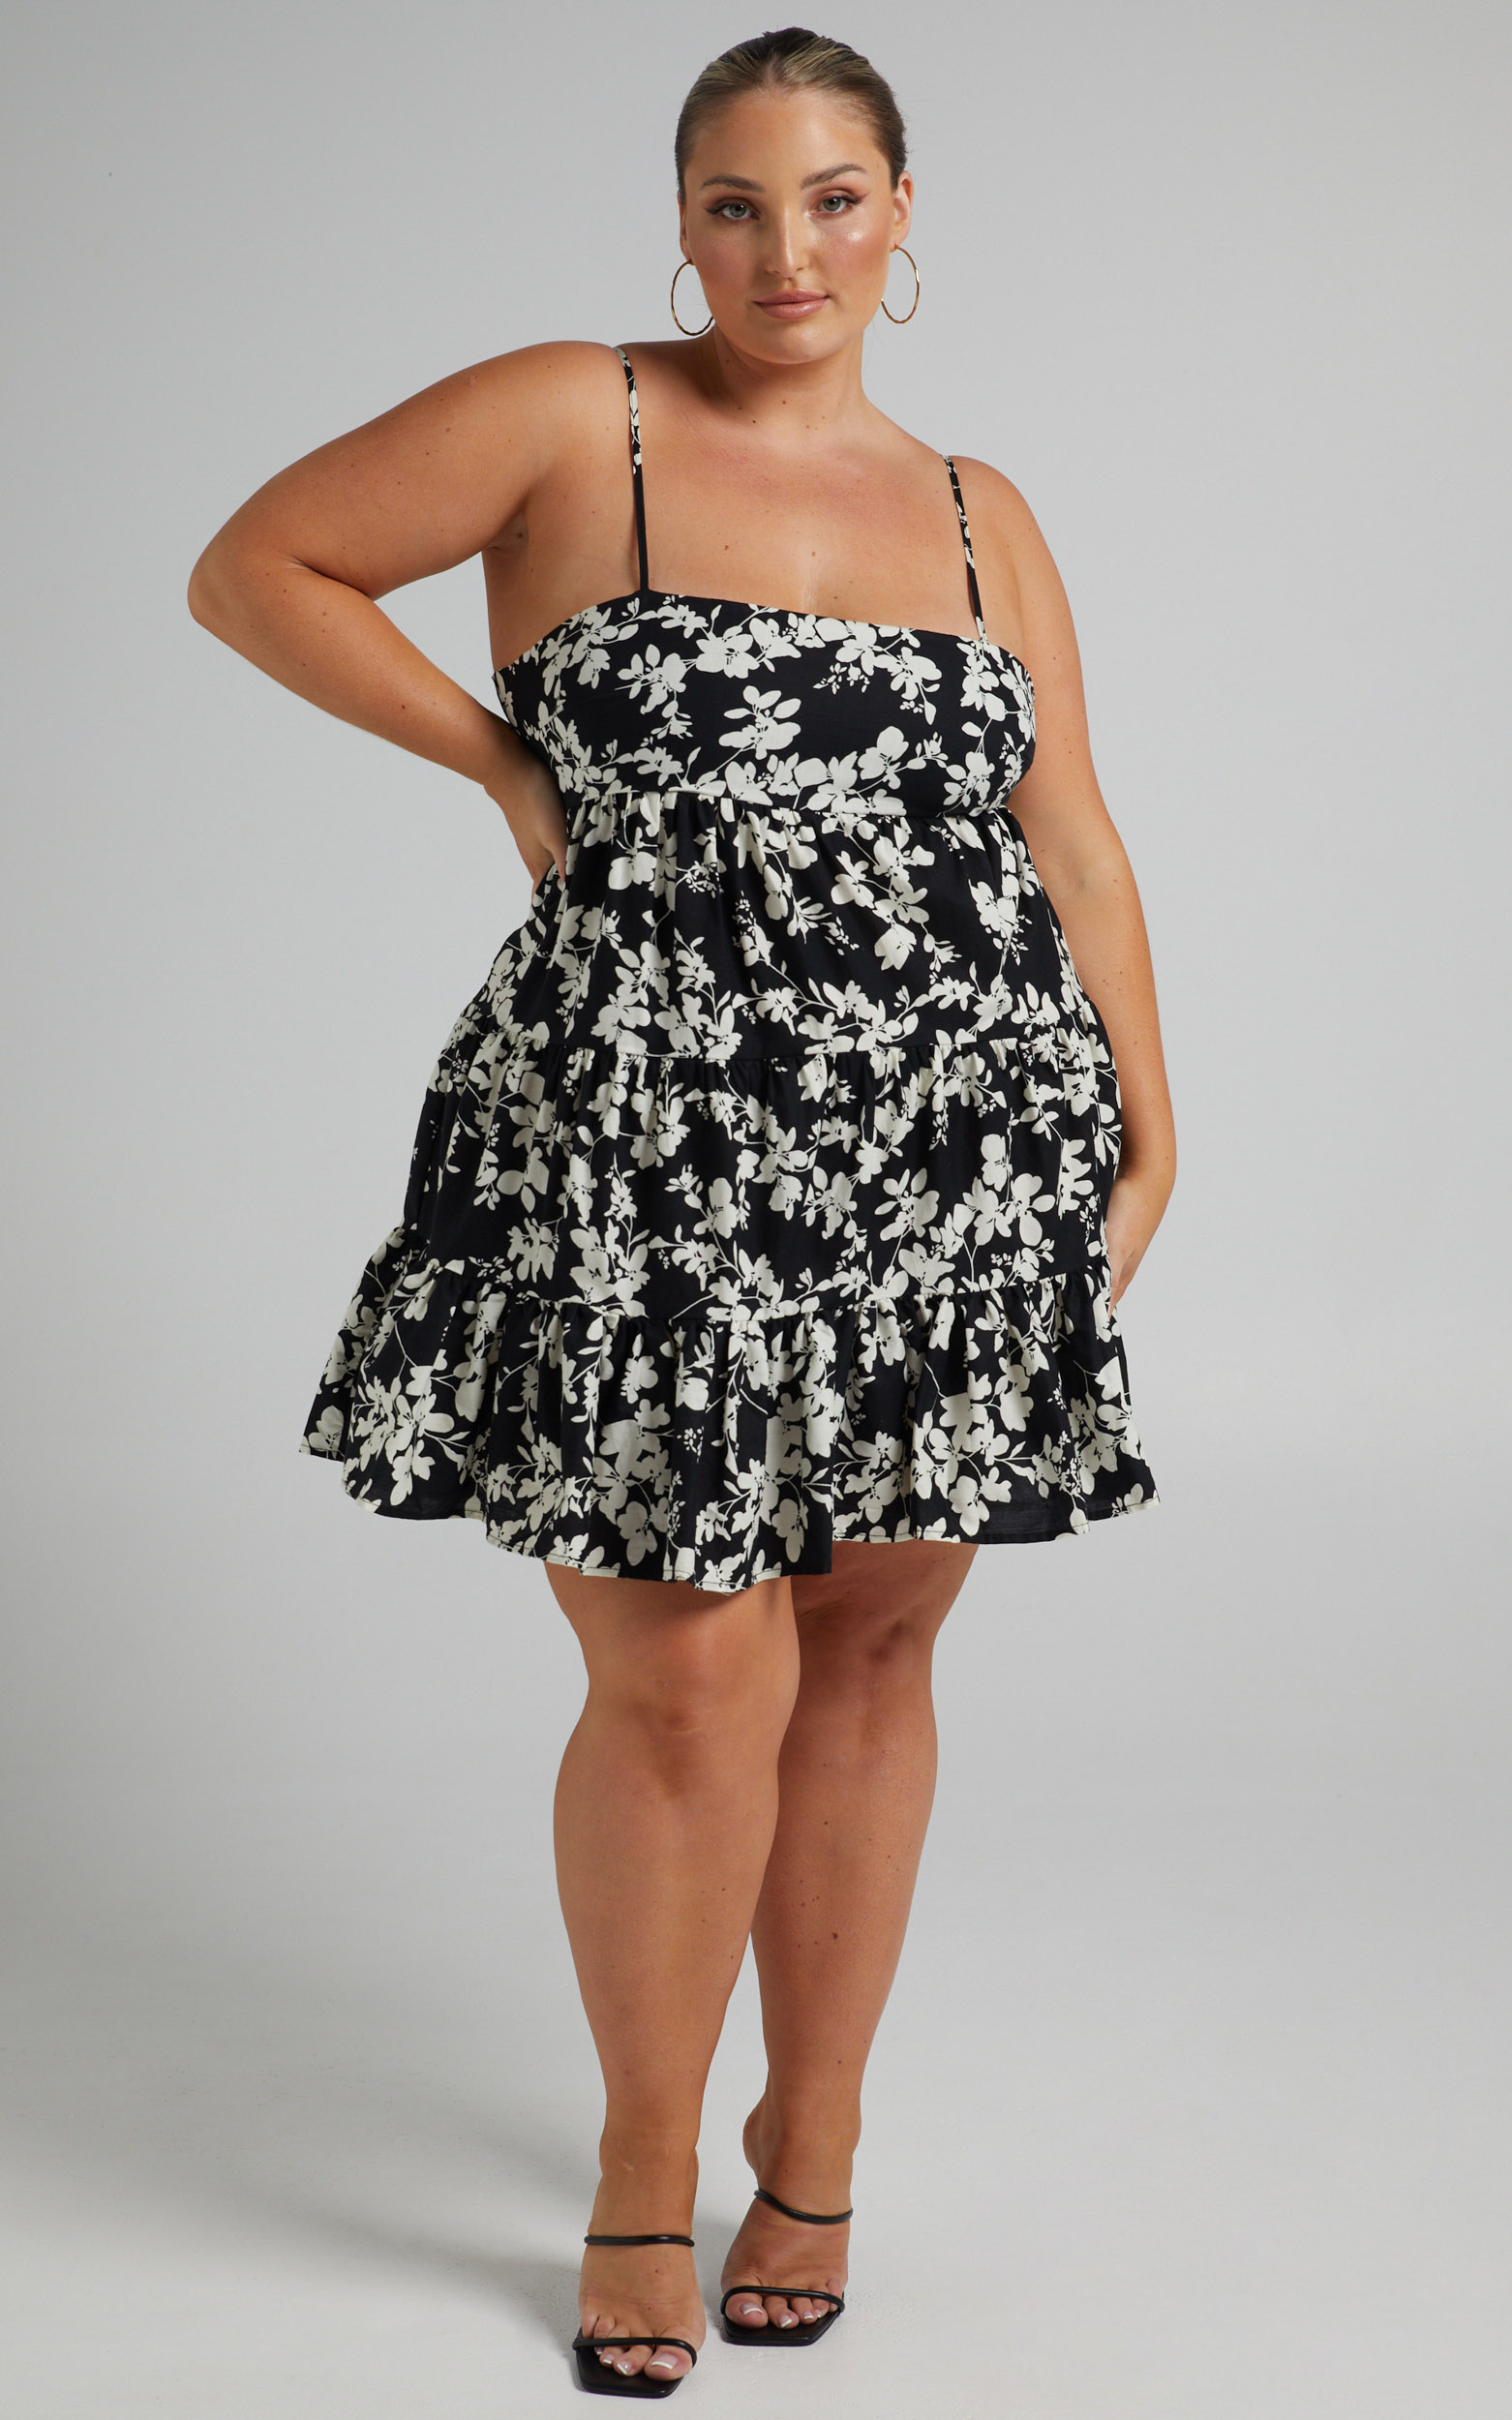 Lorelle Straight Neck Tiered Mini Dress in Black Floral - 04, BLK2, hi-res image number null